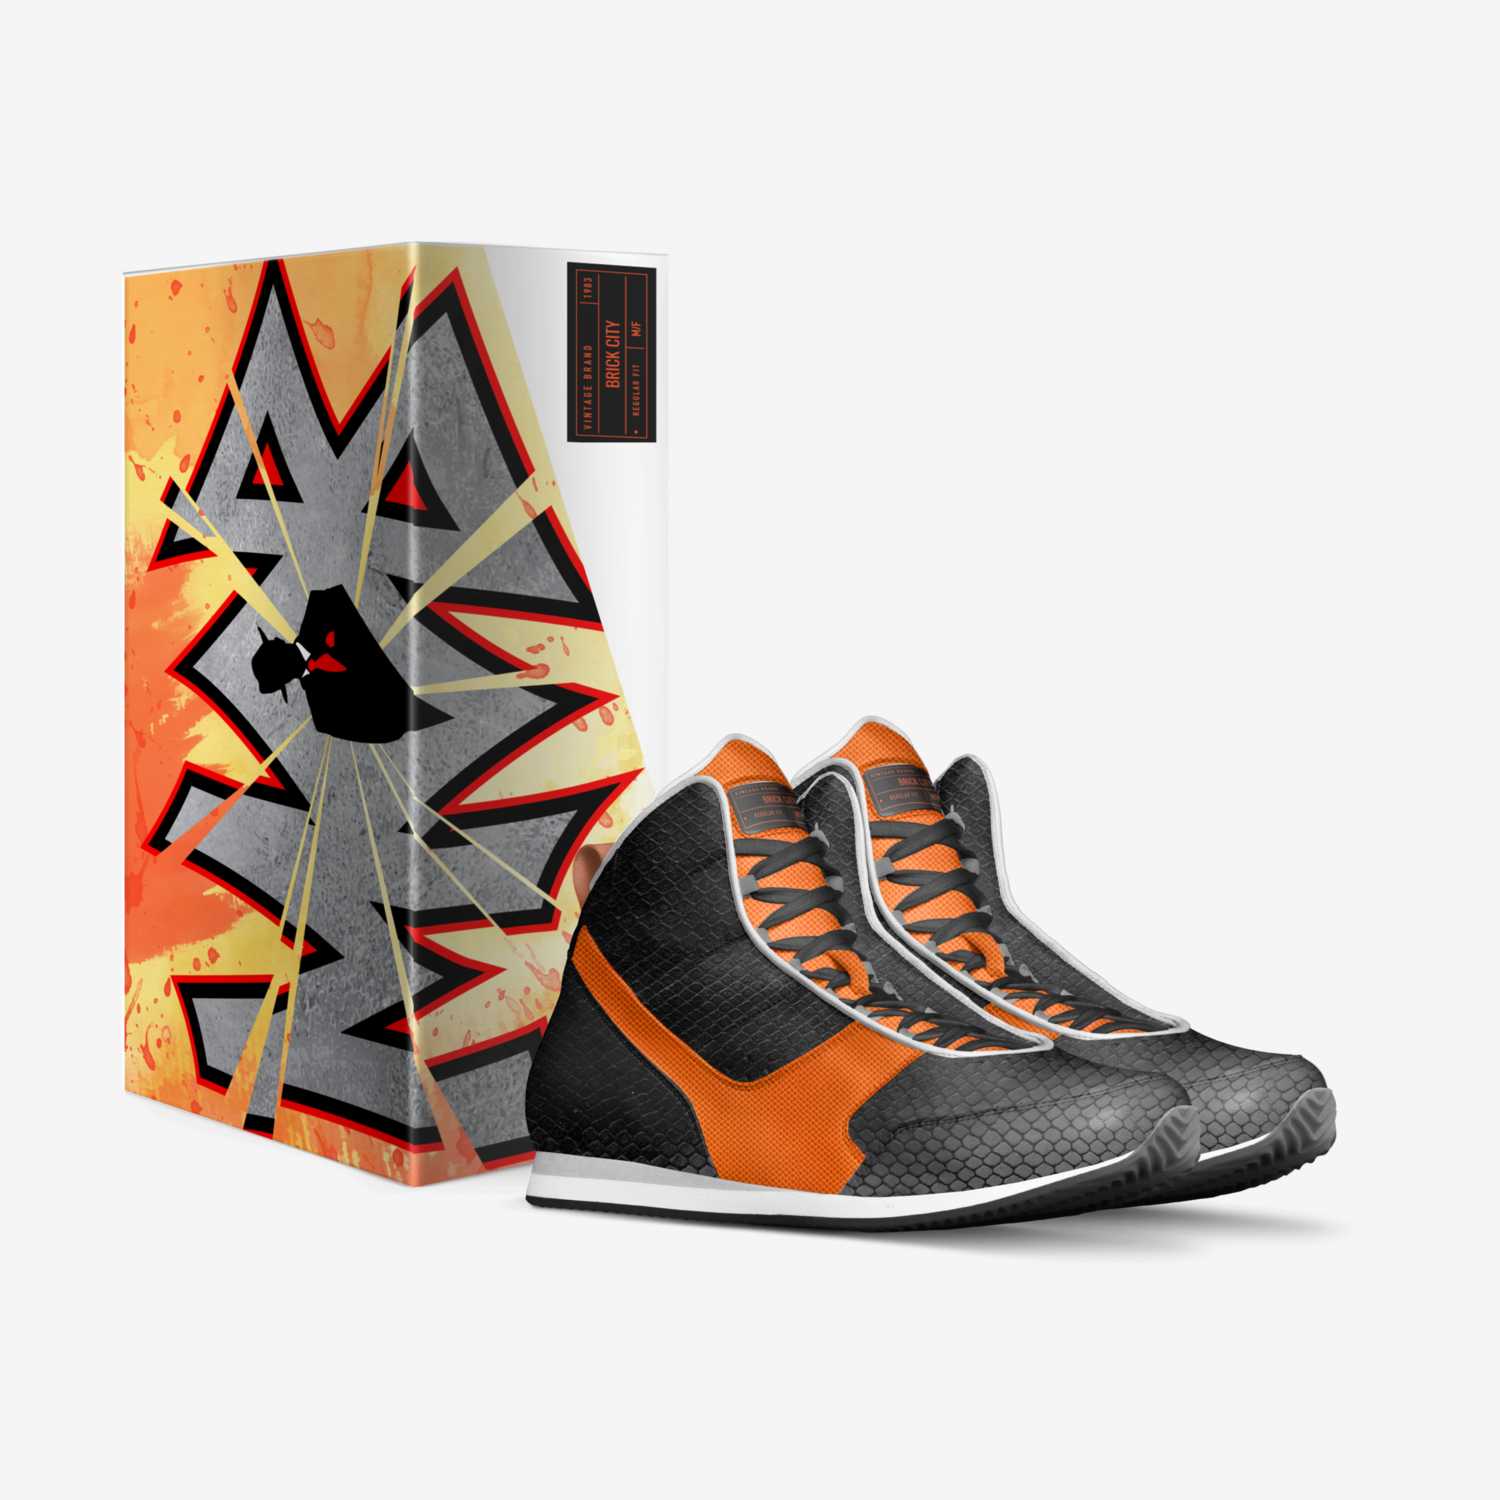 Brick City custom made in Italy shoes by Rich Camacho | Box view